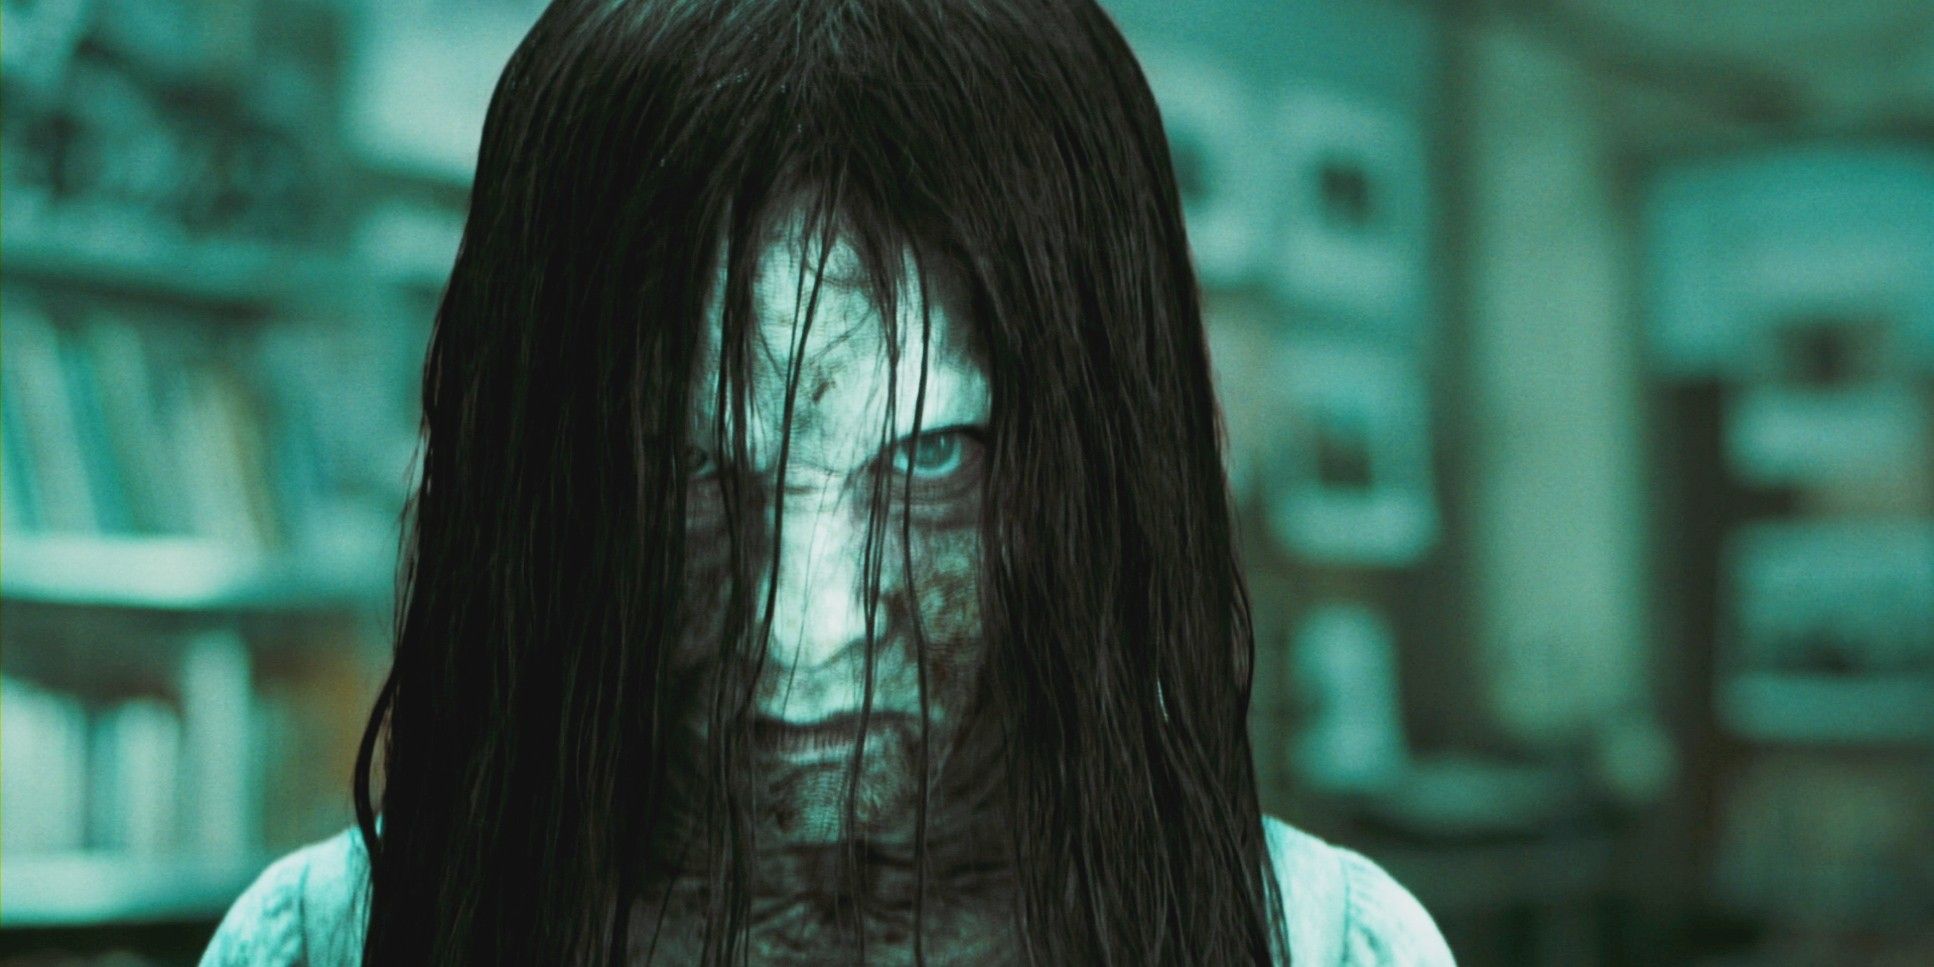 A close-up of Samara (Daveigh Chase) in the 2002 The Ring movie